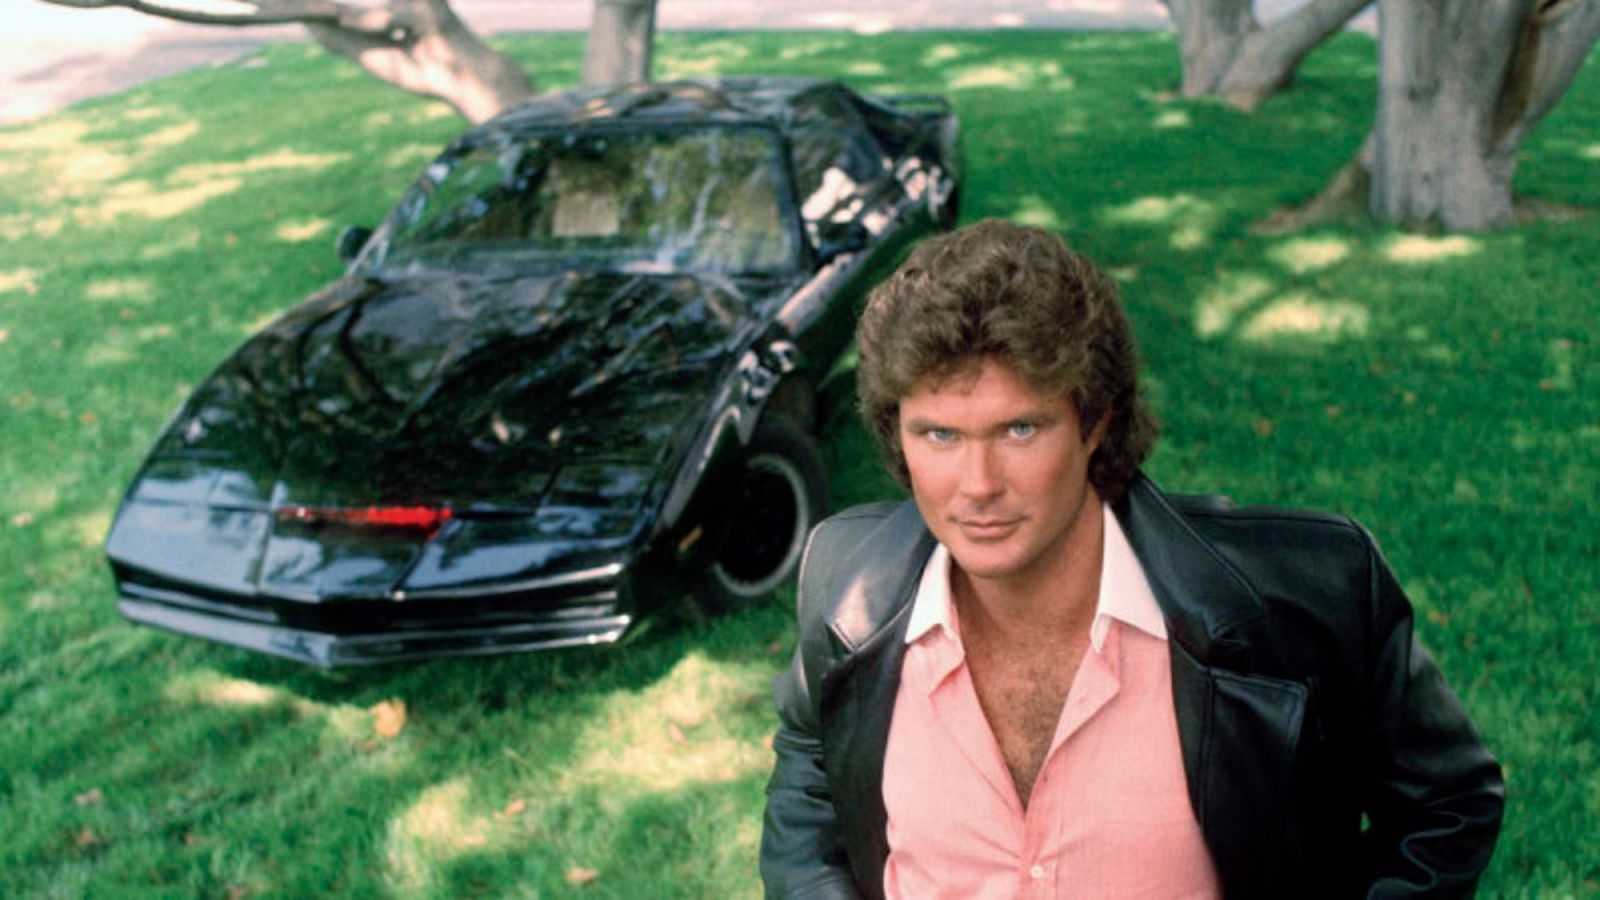 A New Knight Rider Movie Is Being Made